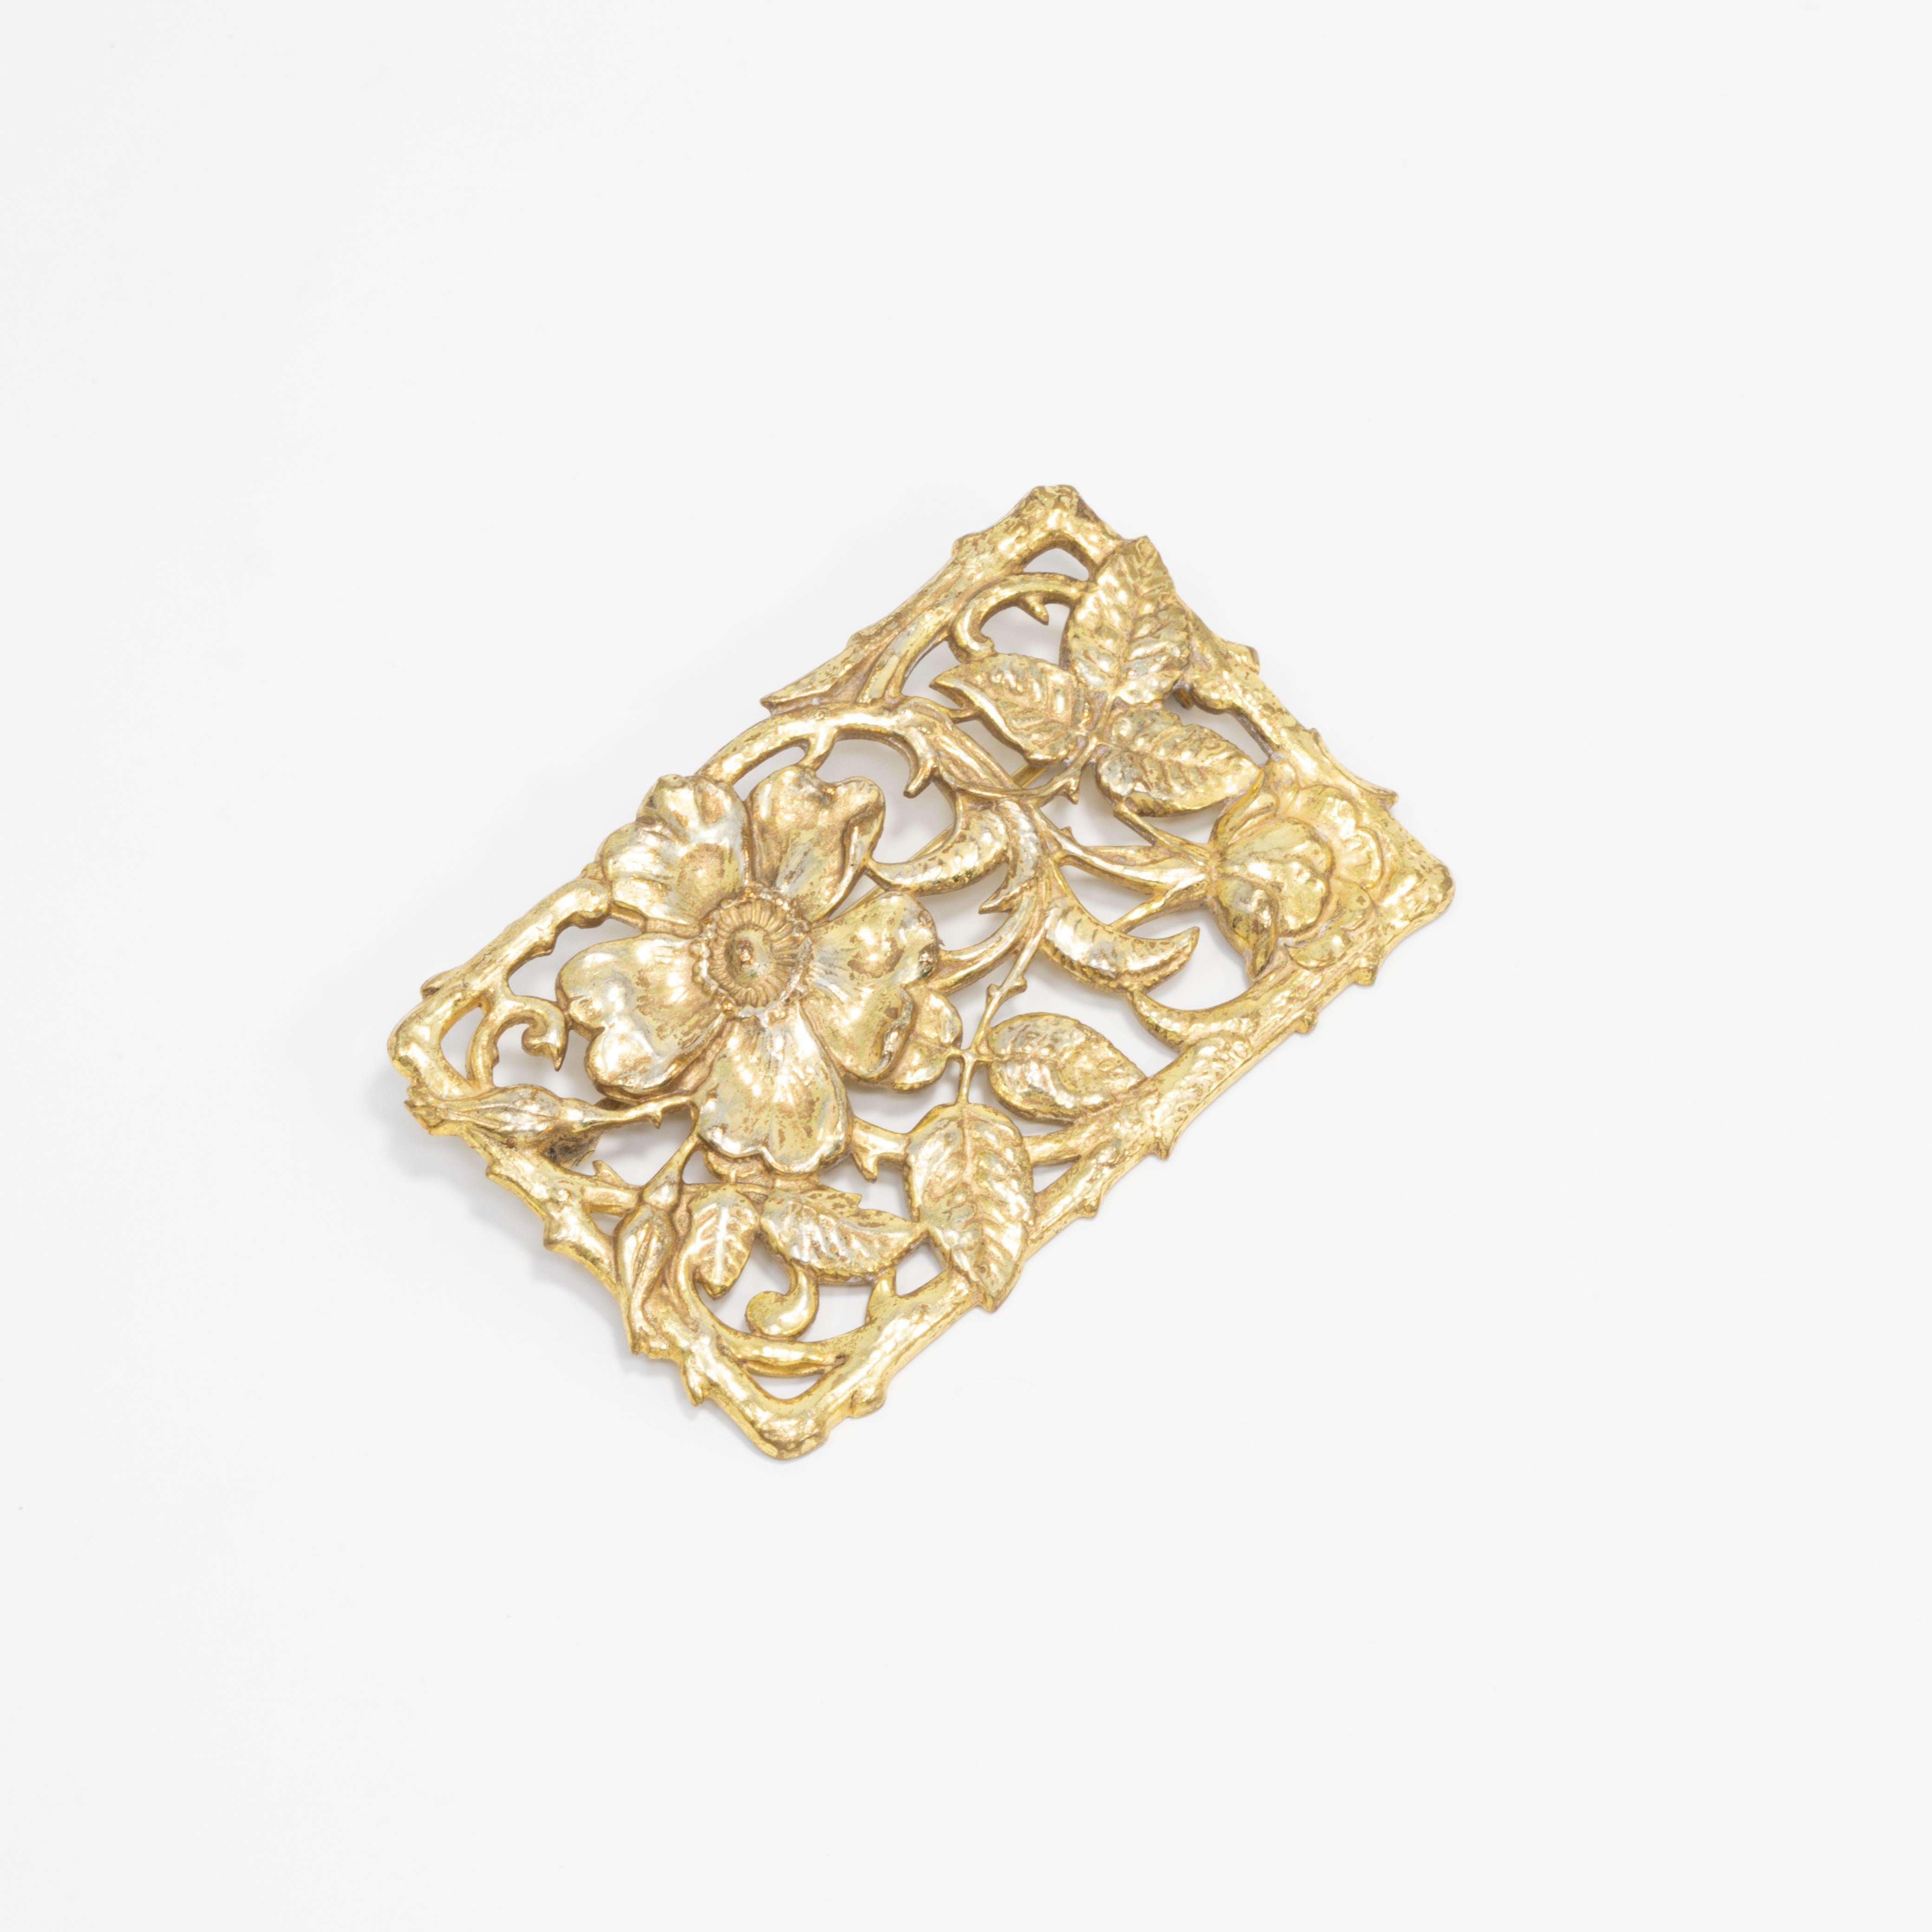 A floral-themed pin by Miriam Haskell. Rectangular, open filigree brooch with leaf and flower motifs.

Mid 1900s.

Hallmarks: Miriam Haskell